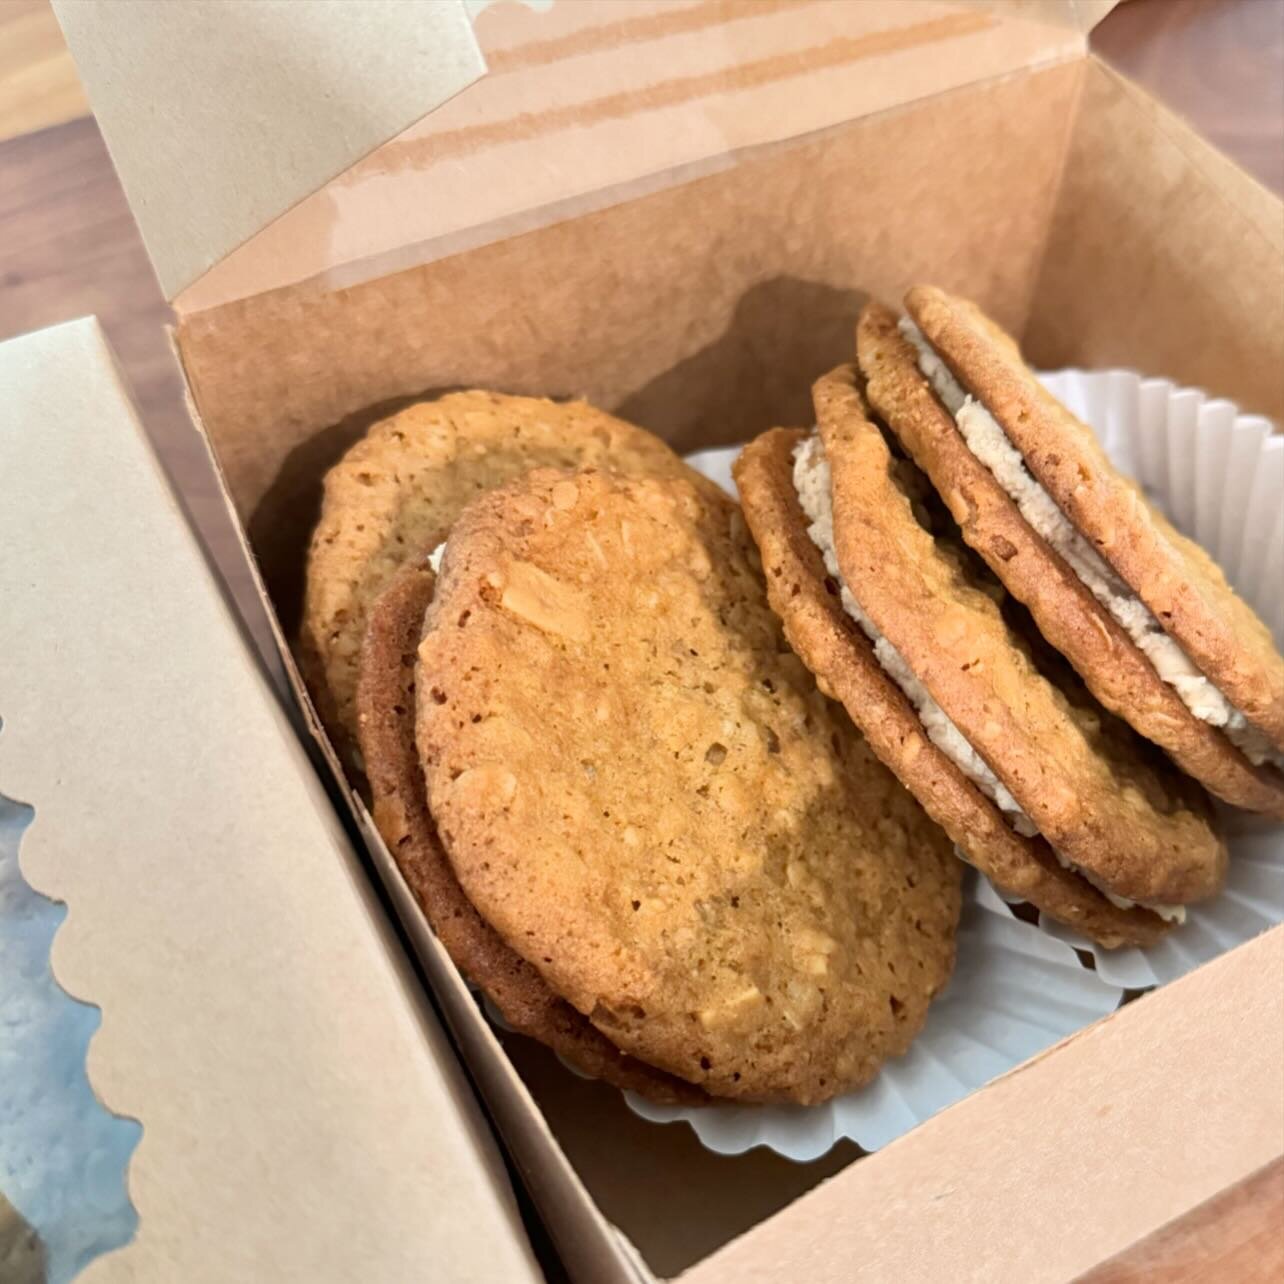 To all Nutter Butter cookie fans - our version available today only at Karl the Store @karl_the_store - crunchy peanut butter cookies filled with fluffy peanut butter filling. #yum #cookiesvspies #homemade